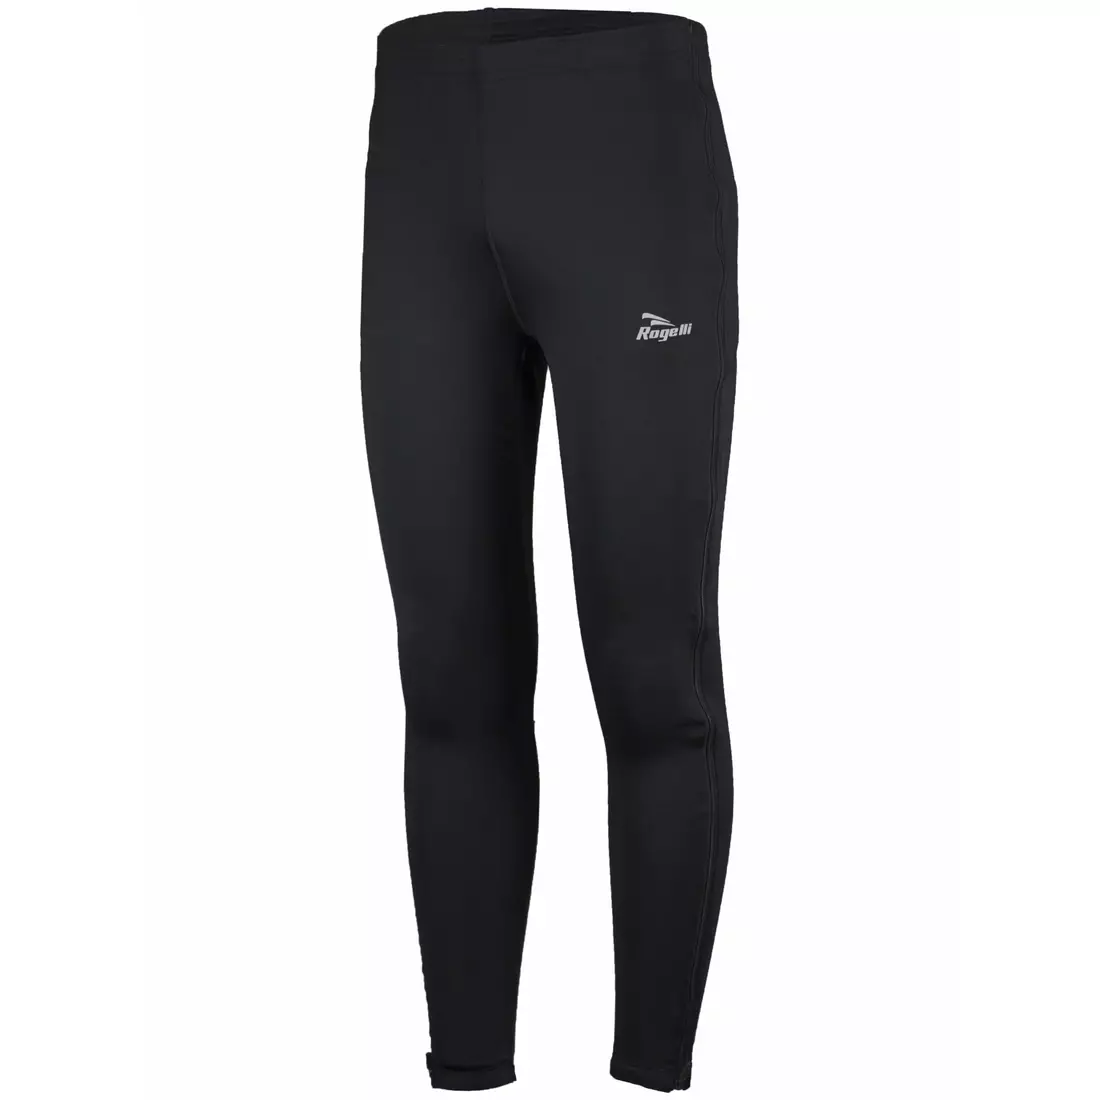 ROGELLI BRENO men's insulated sport pants with full zipper on the sides, without padding, black